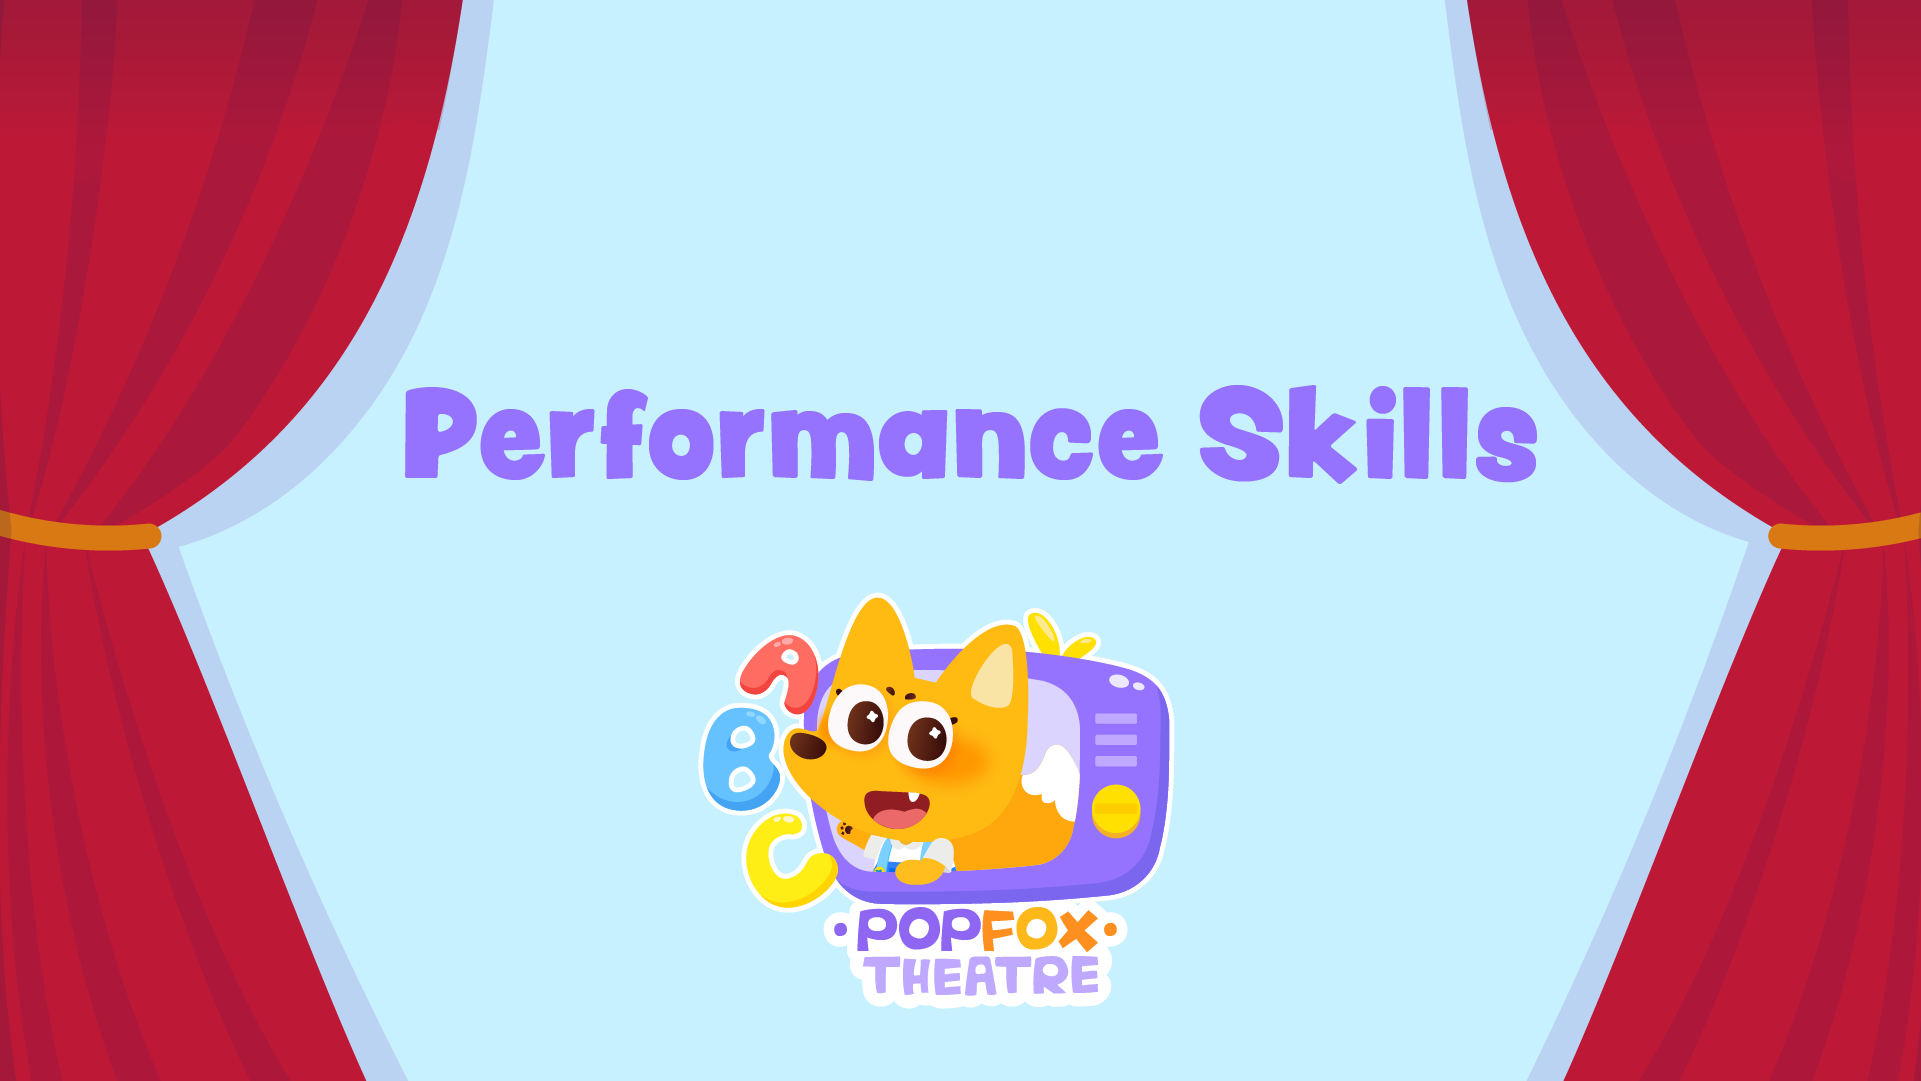 Reviewing Performance Skills